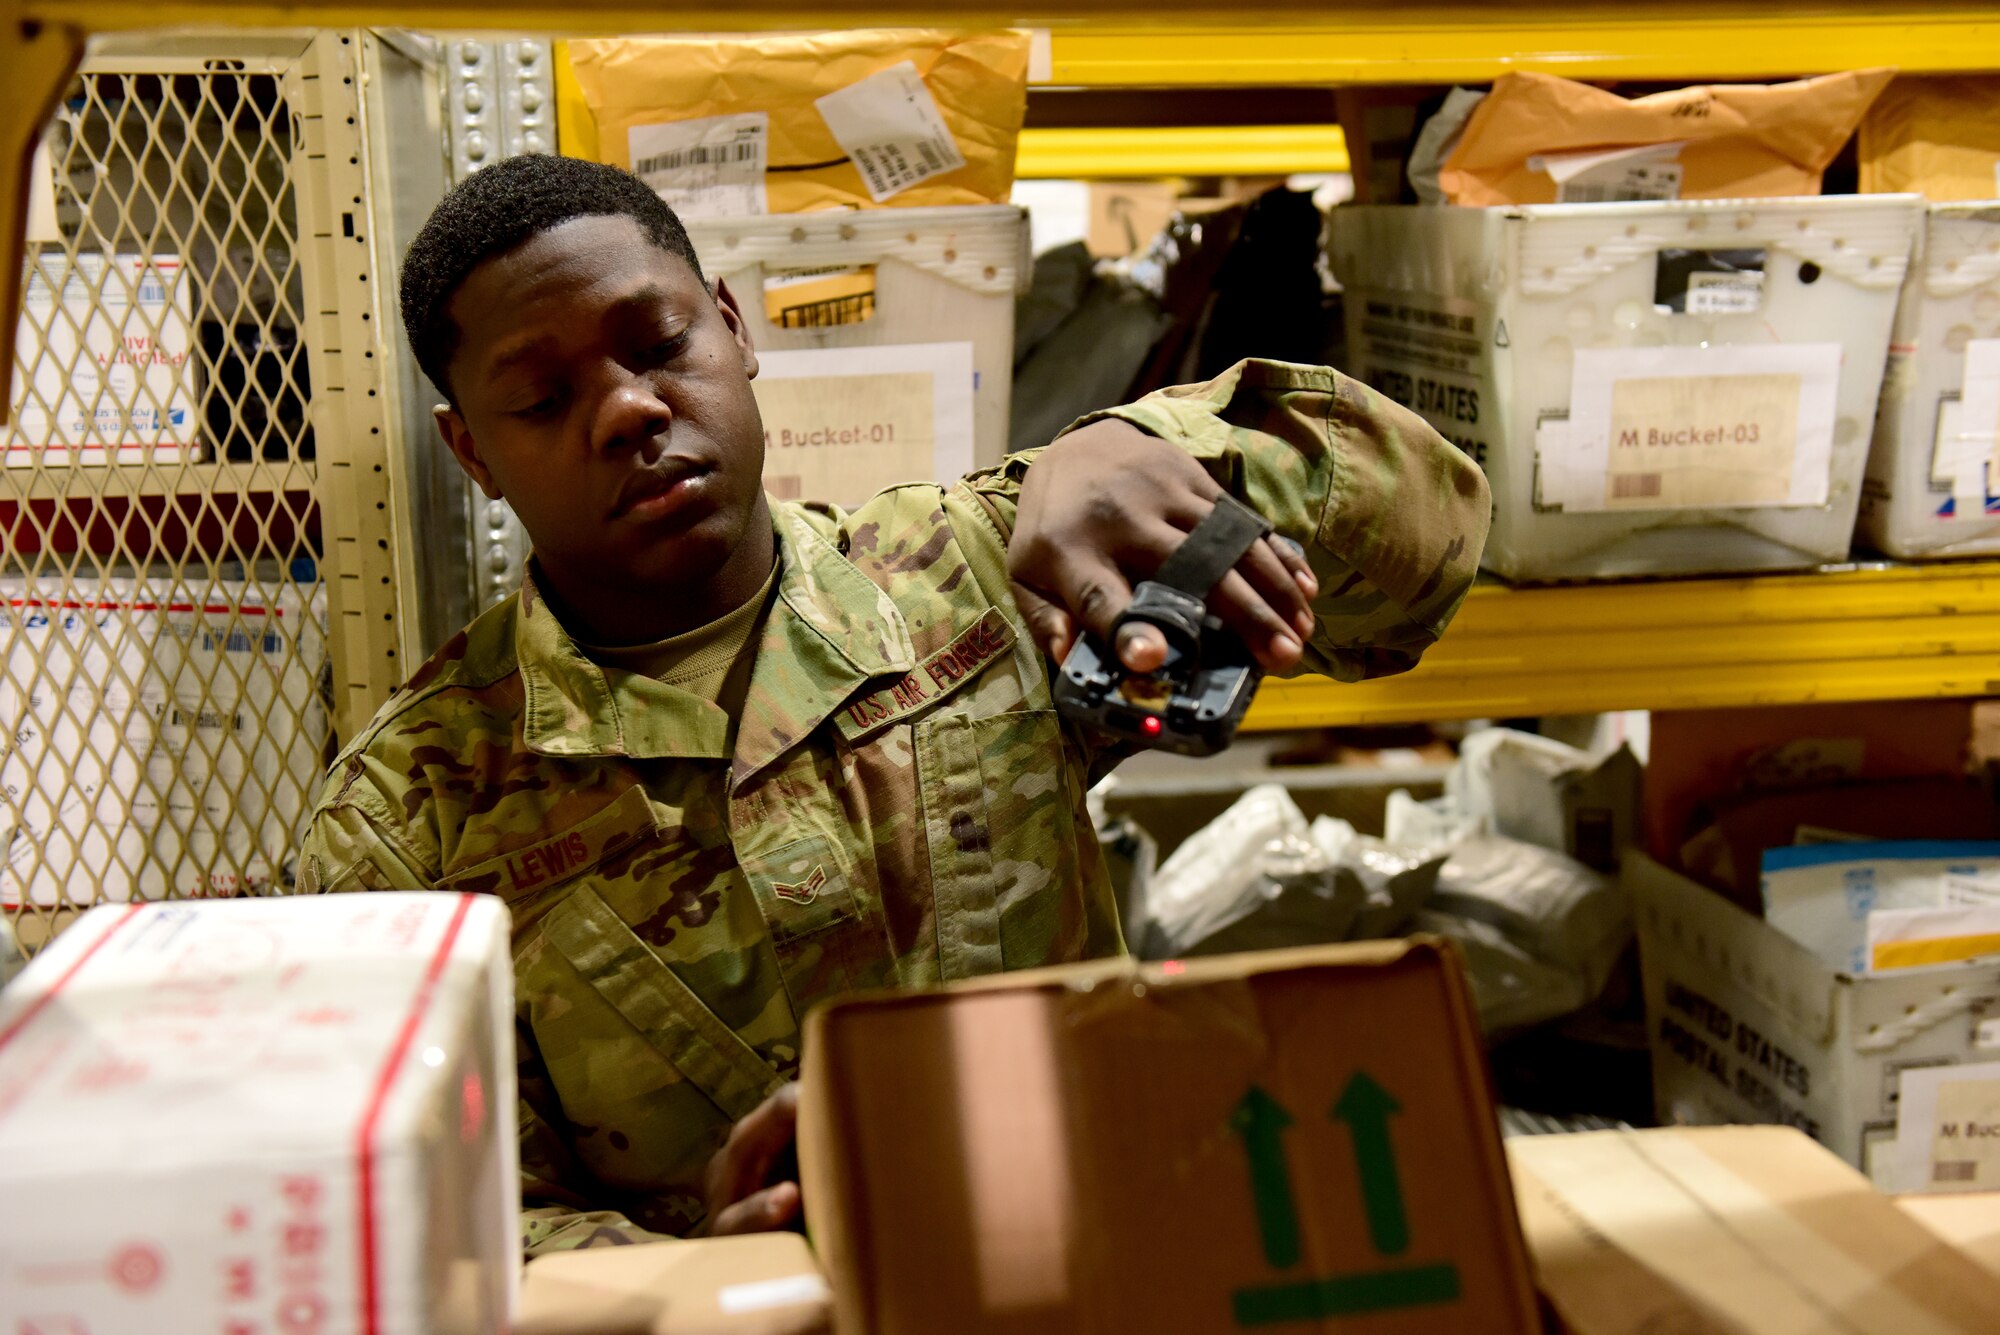 U.S. Air Force Airman 1st Class DeAnthony Lewis, 31st Force Support Squadron postal clerk, scans the label of a package at the Aviano Post Office, Aviano Air Base, Italy, March 25, 2020. Boxes entering the post office are scanned several times, entering them into the system and sending an email to the recipient notifying them of the package’s arrival. (U.S. Air Force photo by Staff Sgt. Kelsey Tucker)